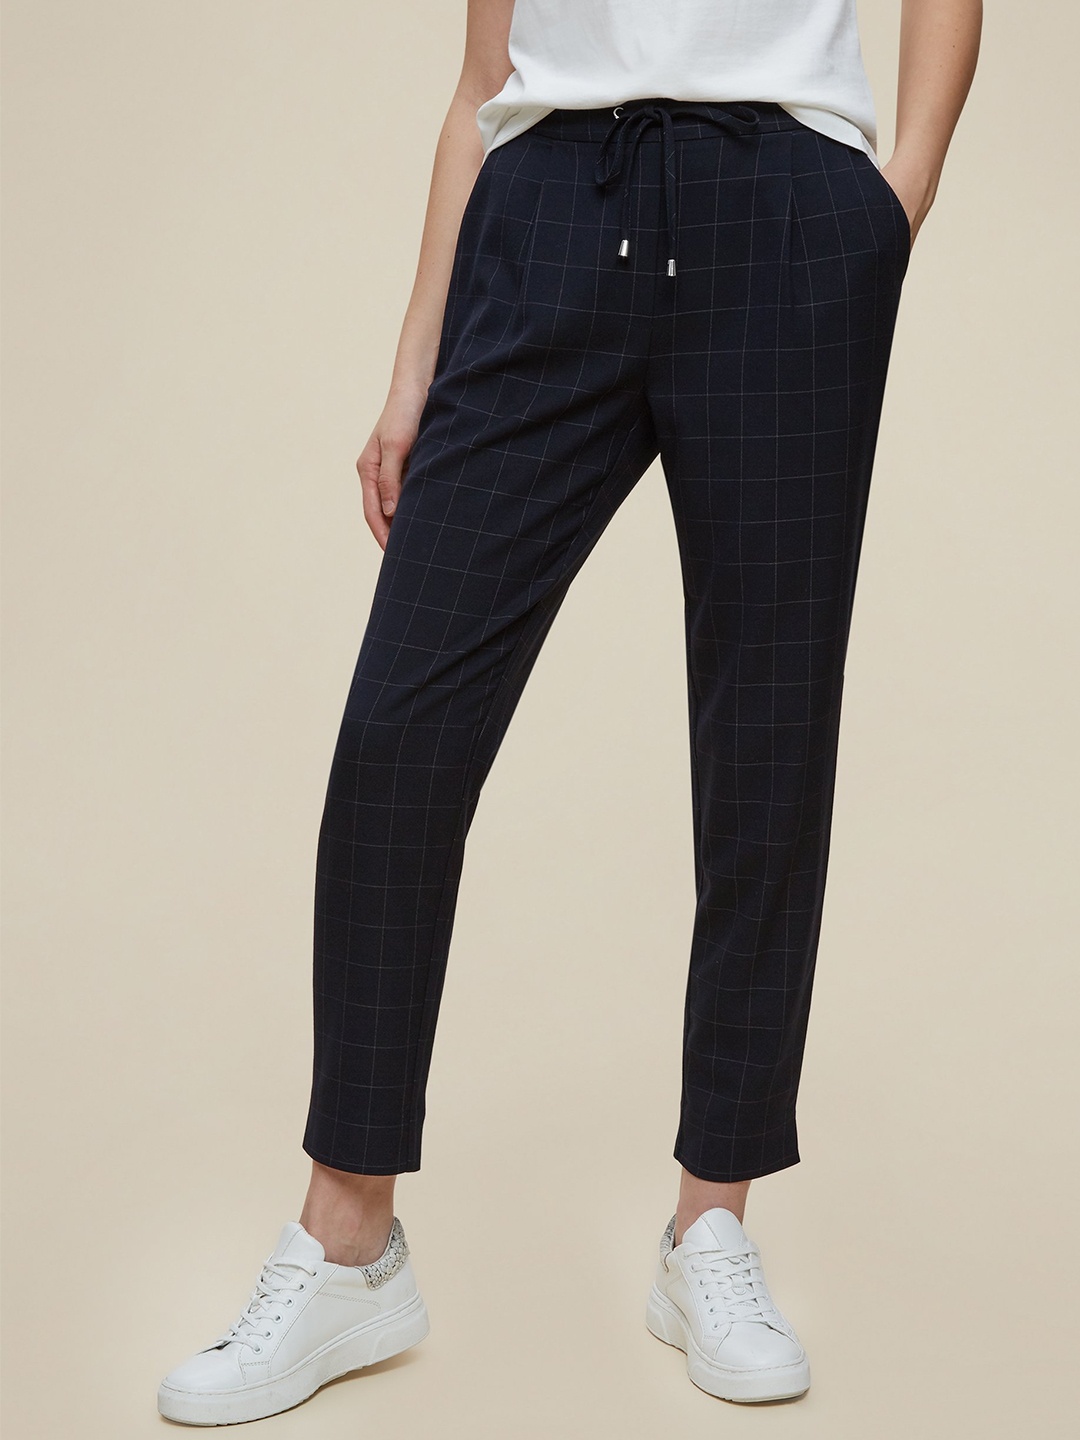 

DOROTHY PERKINS Women Navy Blue Tapered Fit Checked Cropped Trousers